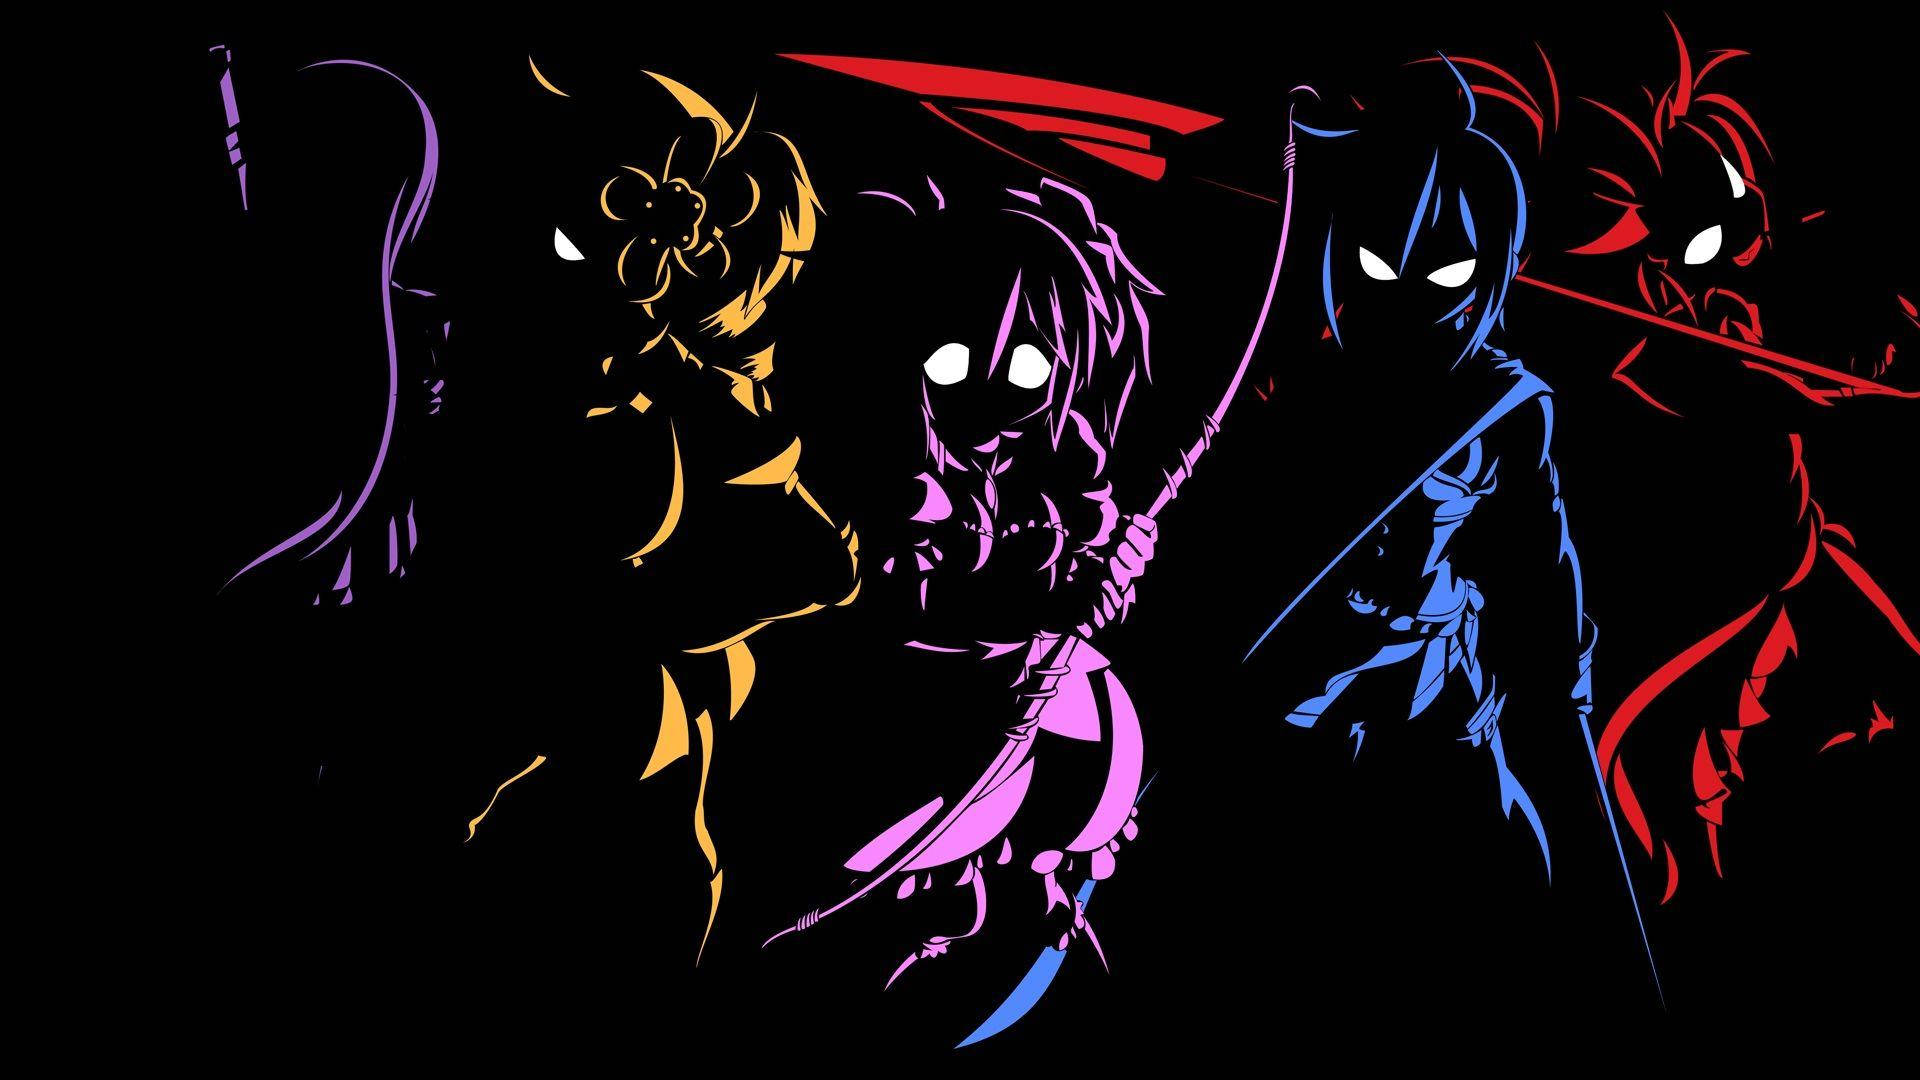 Black Anime 1920X1080 Wallpaper and Background Image